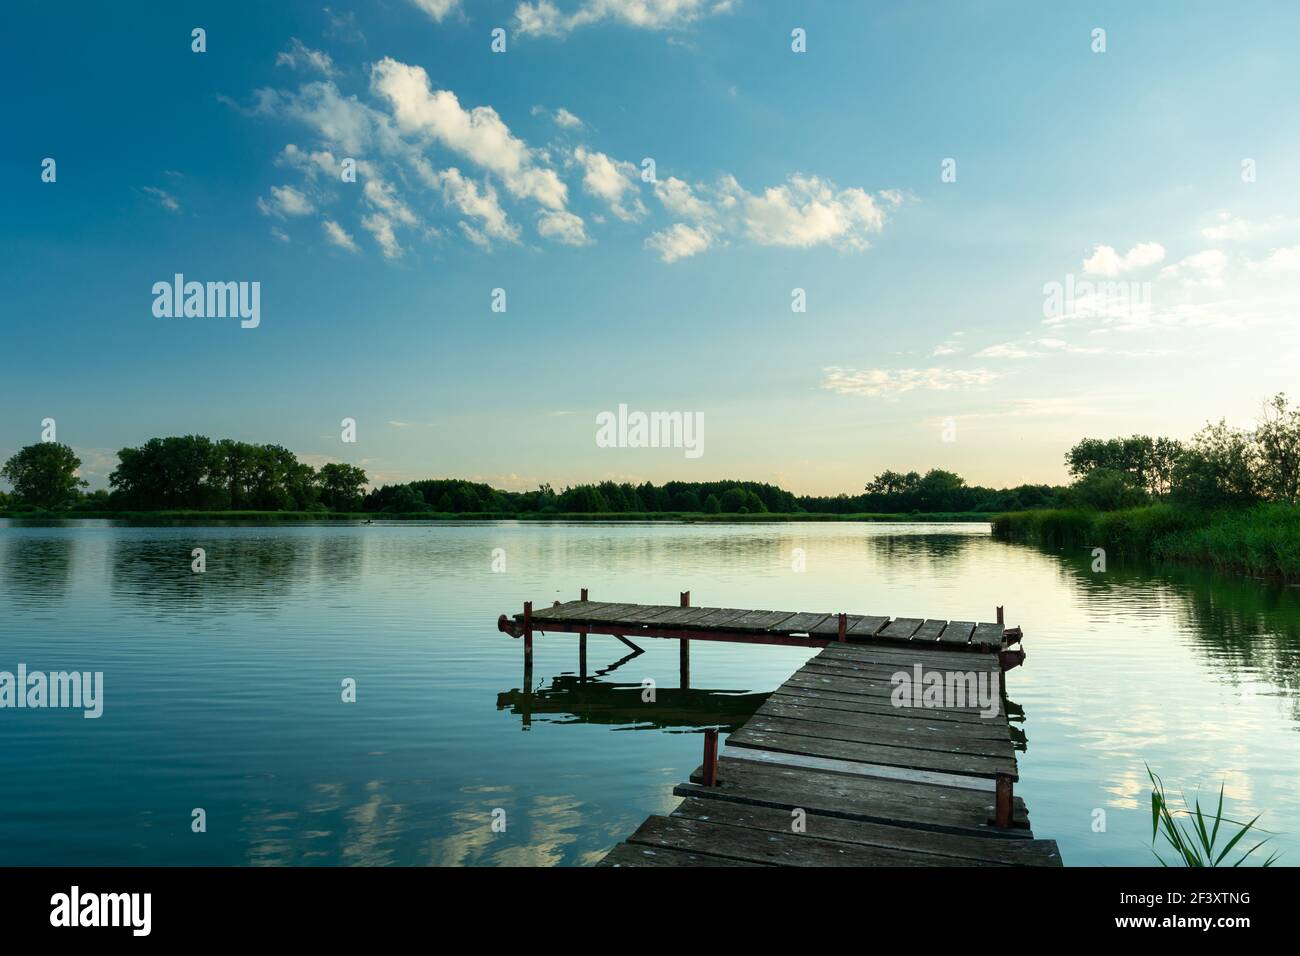 A wooden fishing pier and a calm blue lake, Stankow, Poland Stock Photo